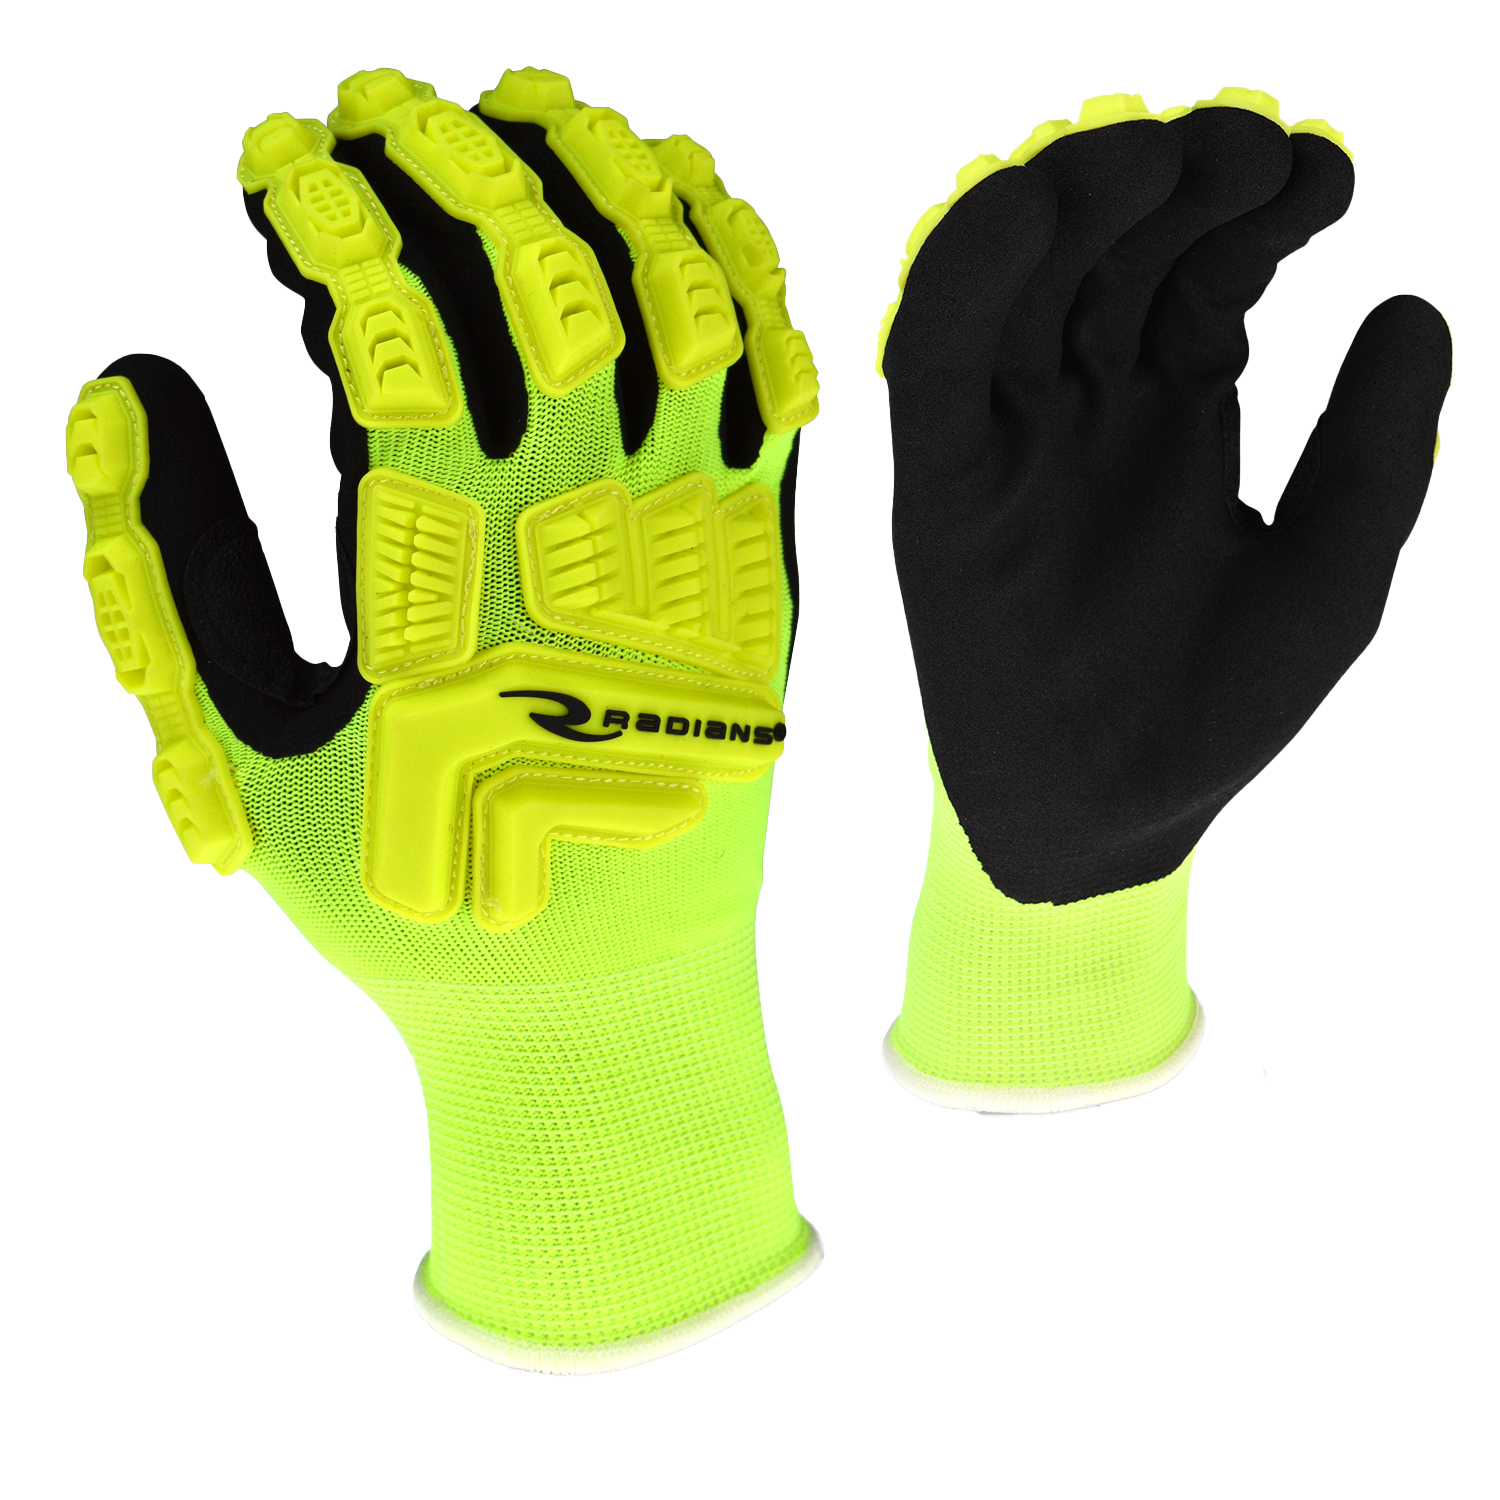 RWG21 High Visibility Work Glove with TPR - Size M